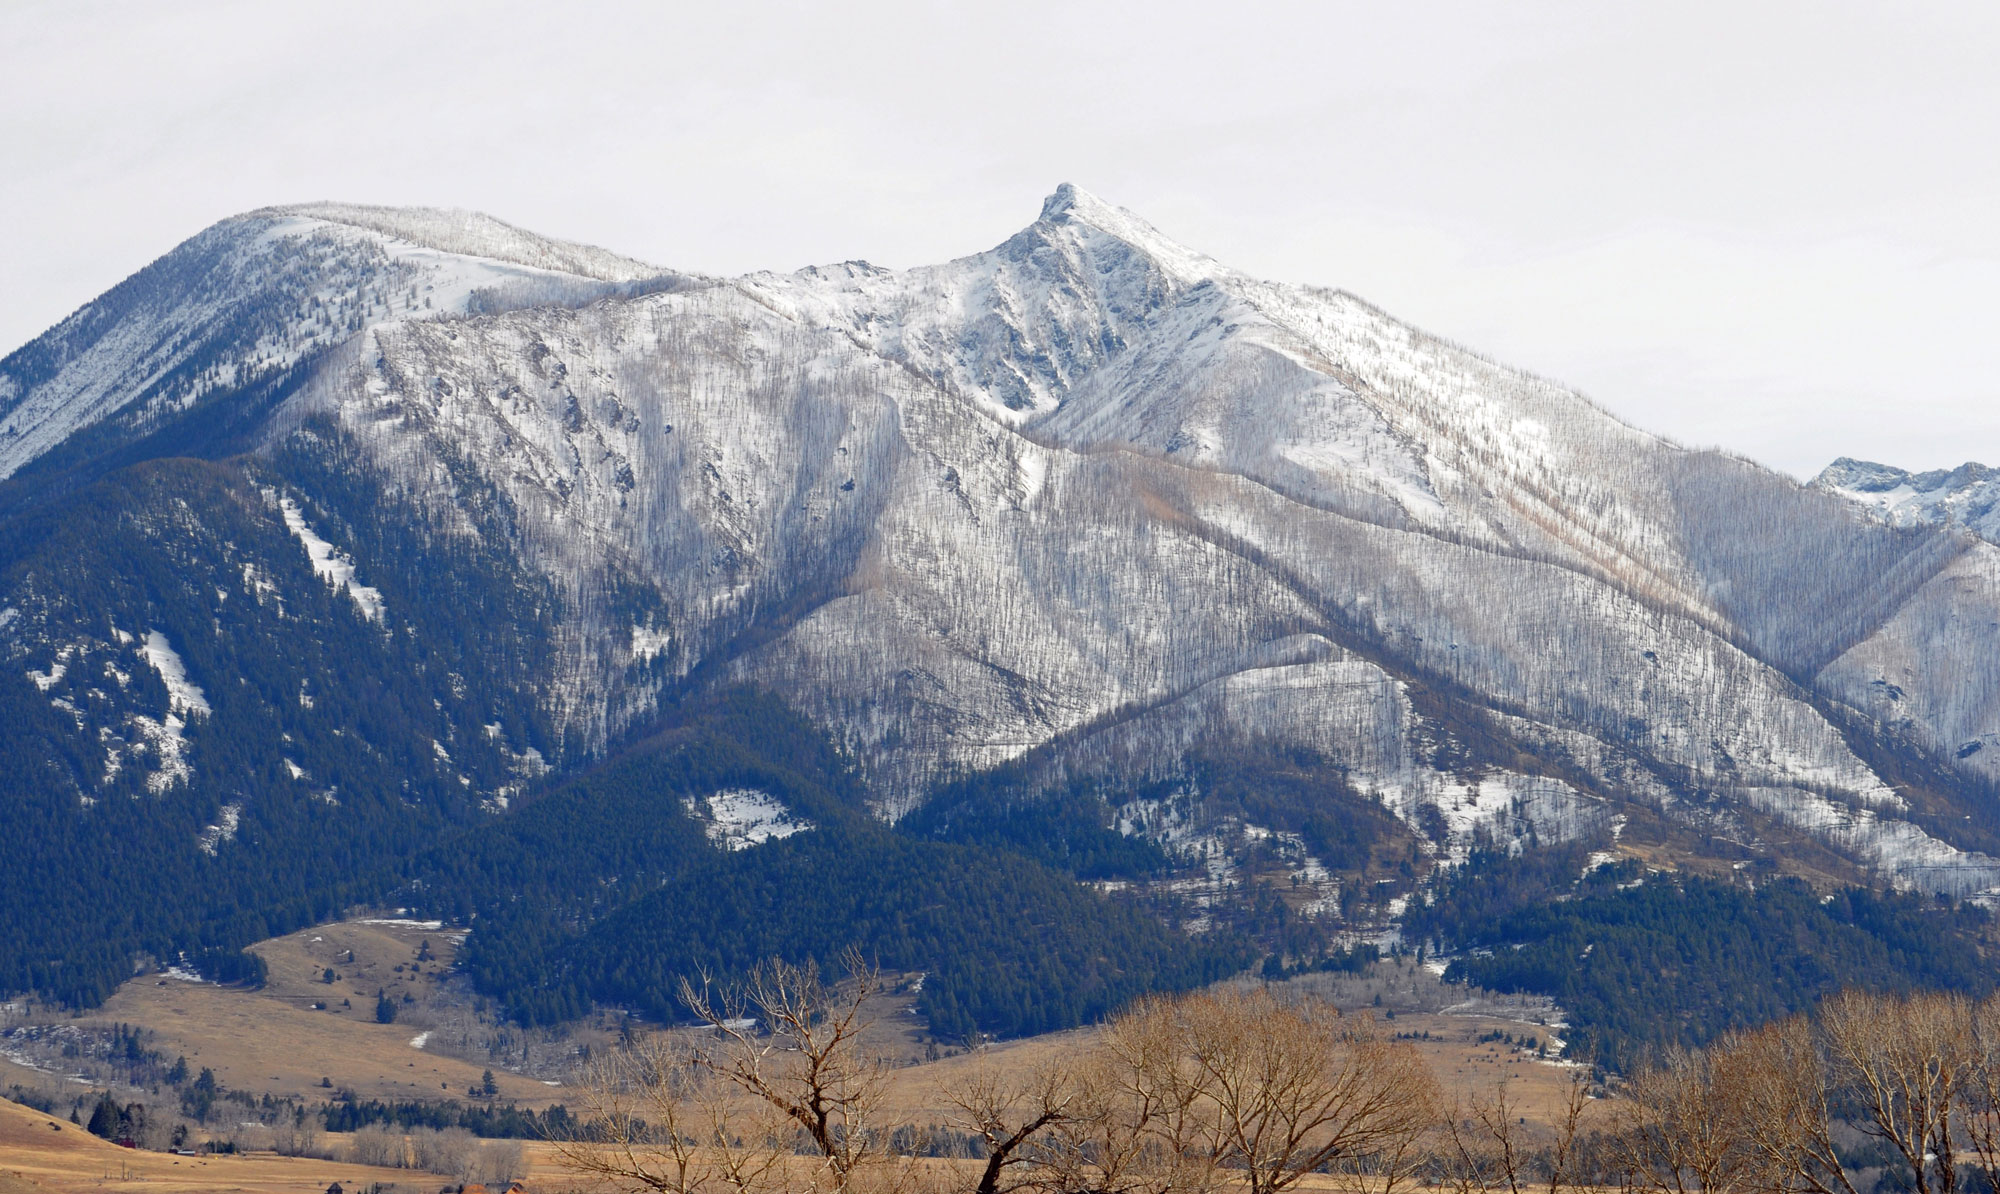 Photograph of Mount Delano in the Absaroka Range of Montana. The photo shows a mountain covered with conifers and a light dusting of snow. At the base of the mountain is a yellow field. The sky is white with clouds.